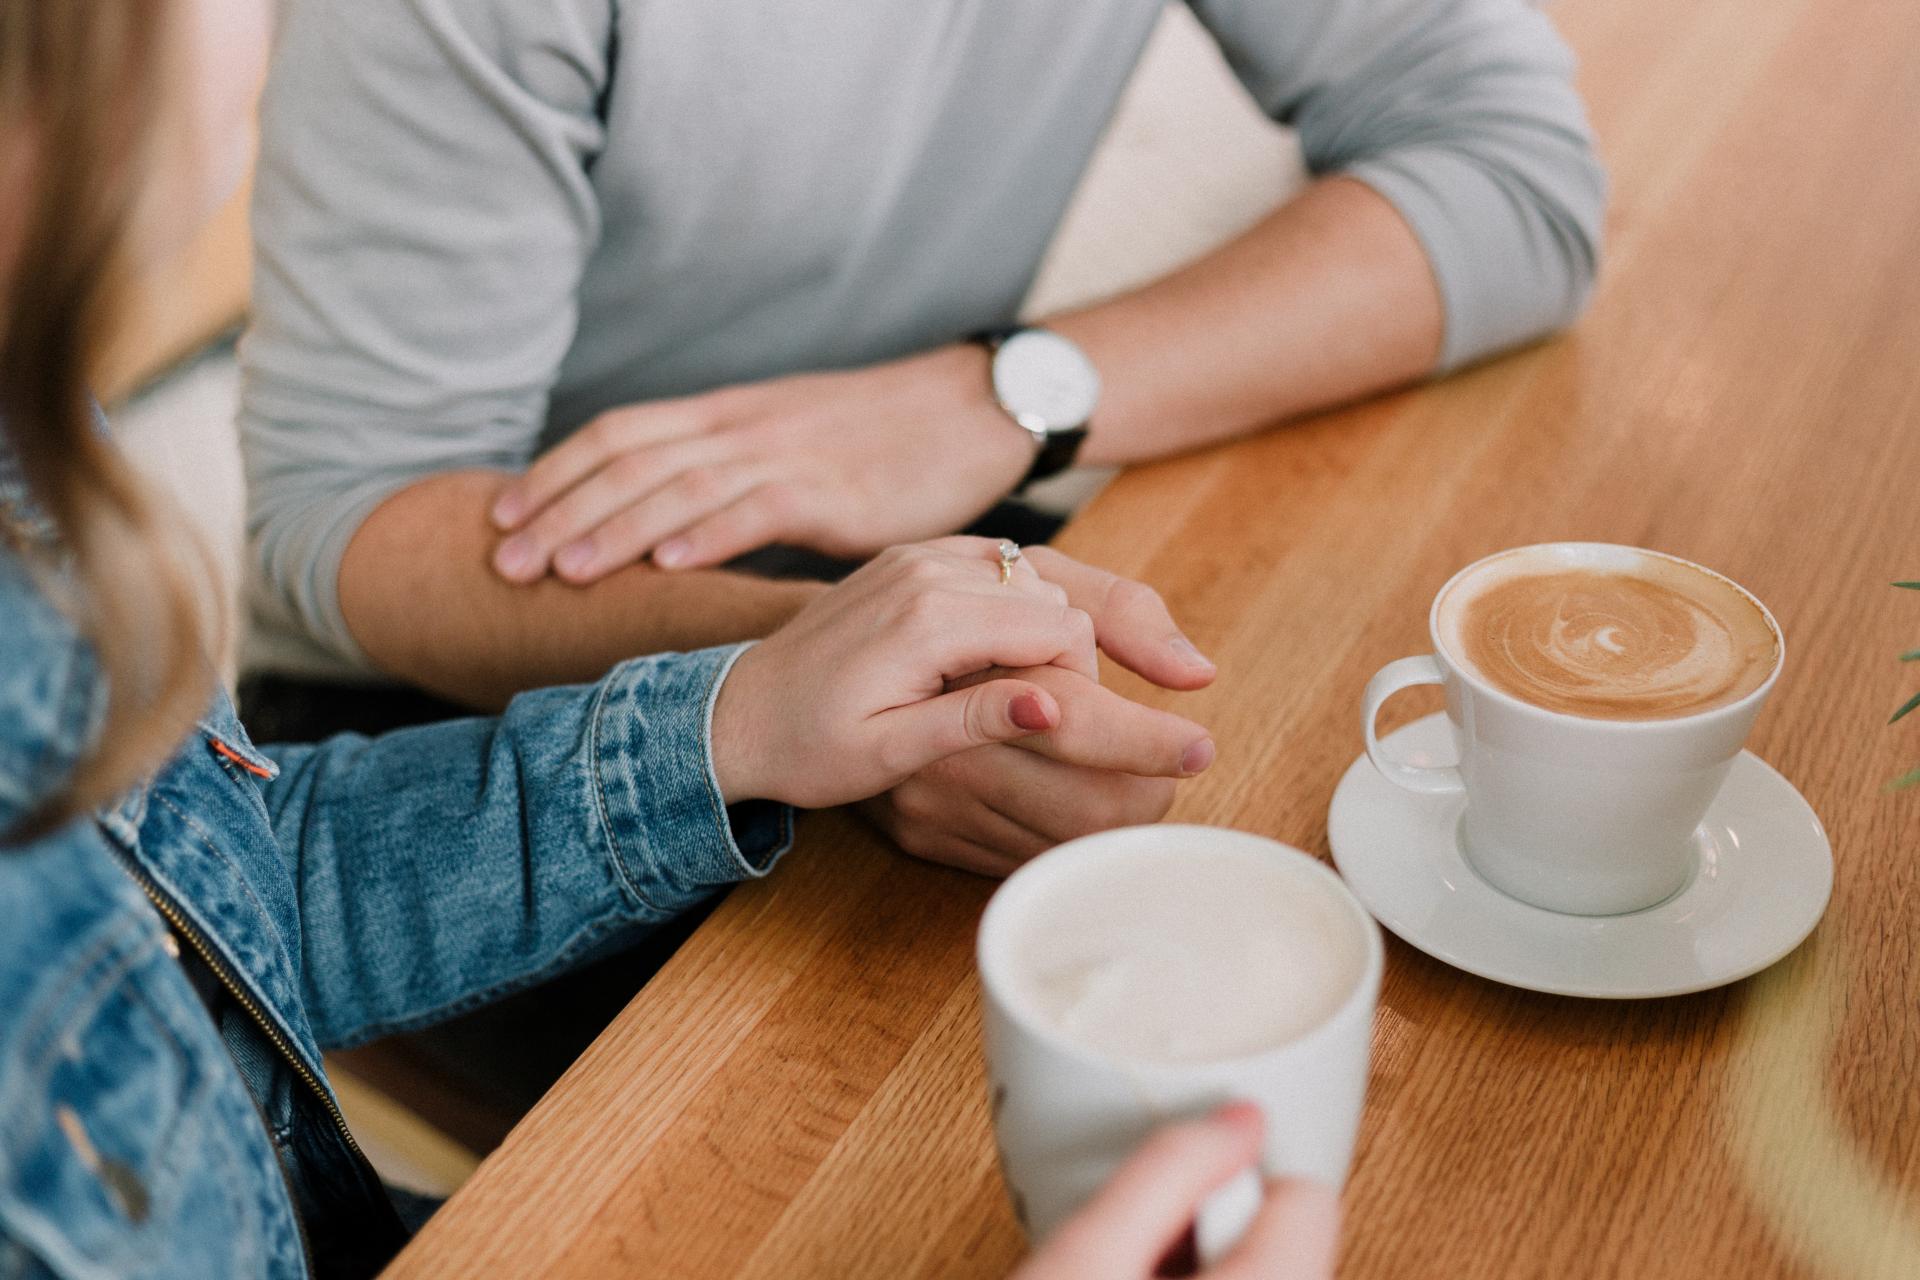 Two people sit at a table with cups of coffee, their hands touch